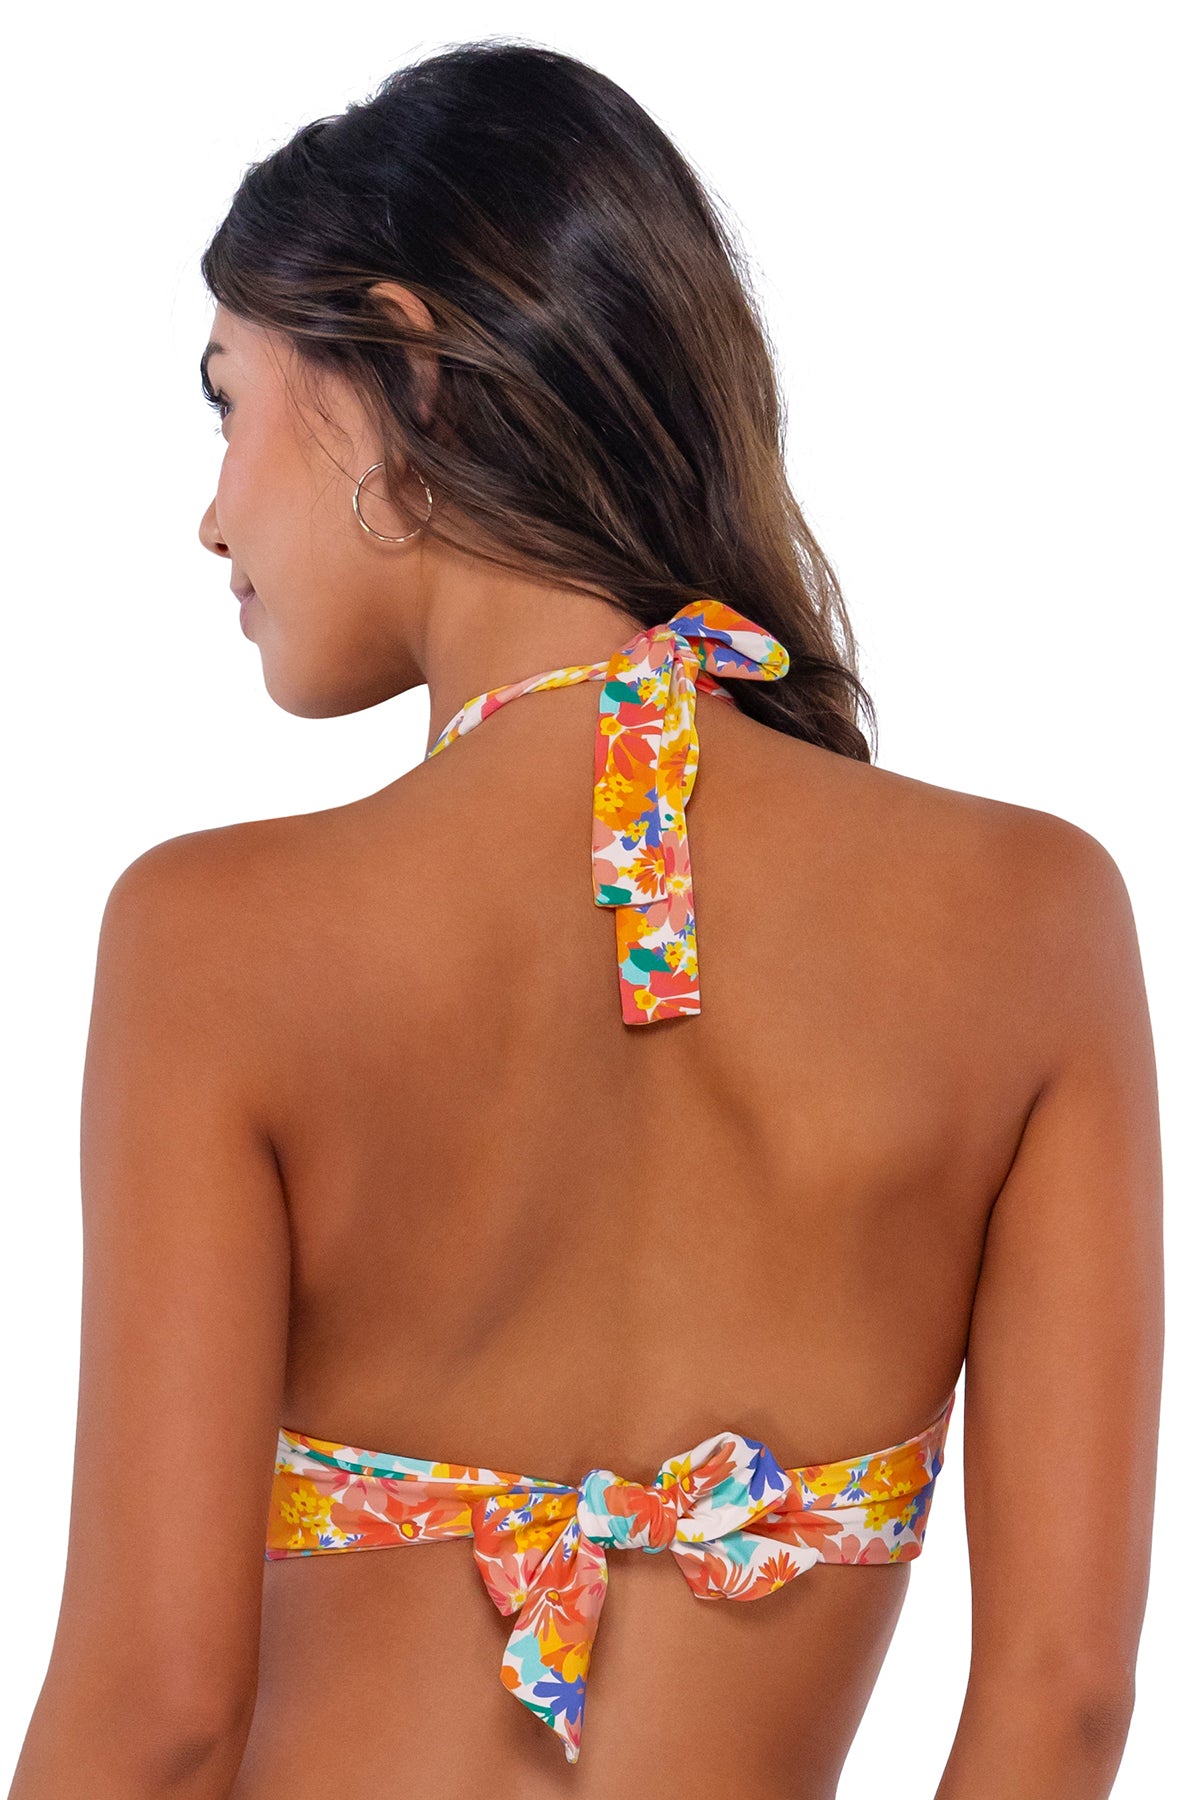 Back pose #1 of Chonzie wearing Swim Systems Beach Blooms Kendall Top